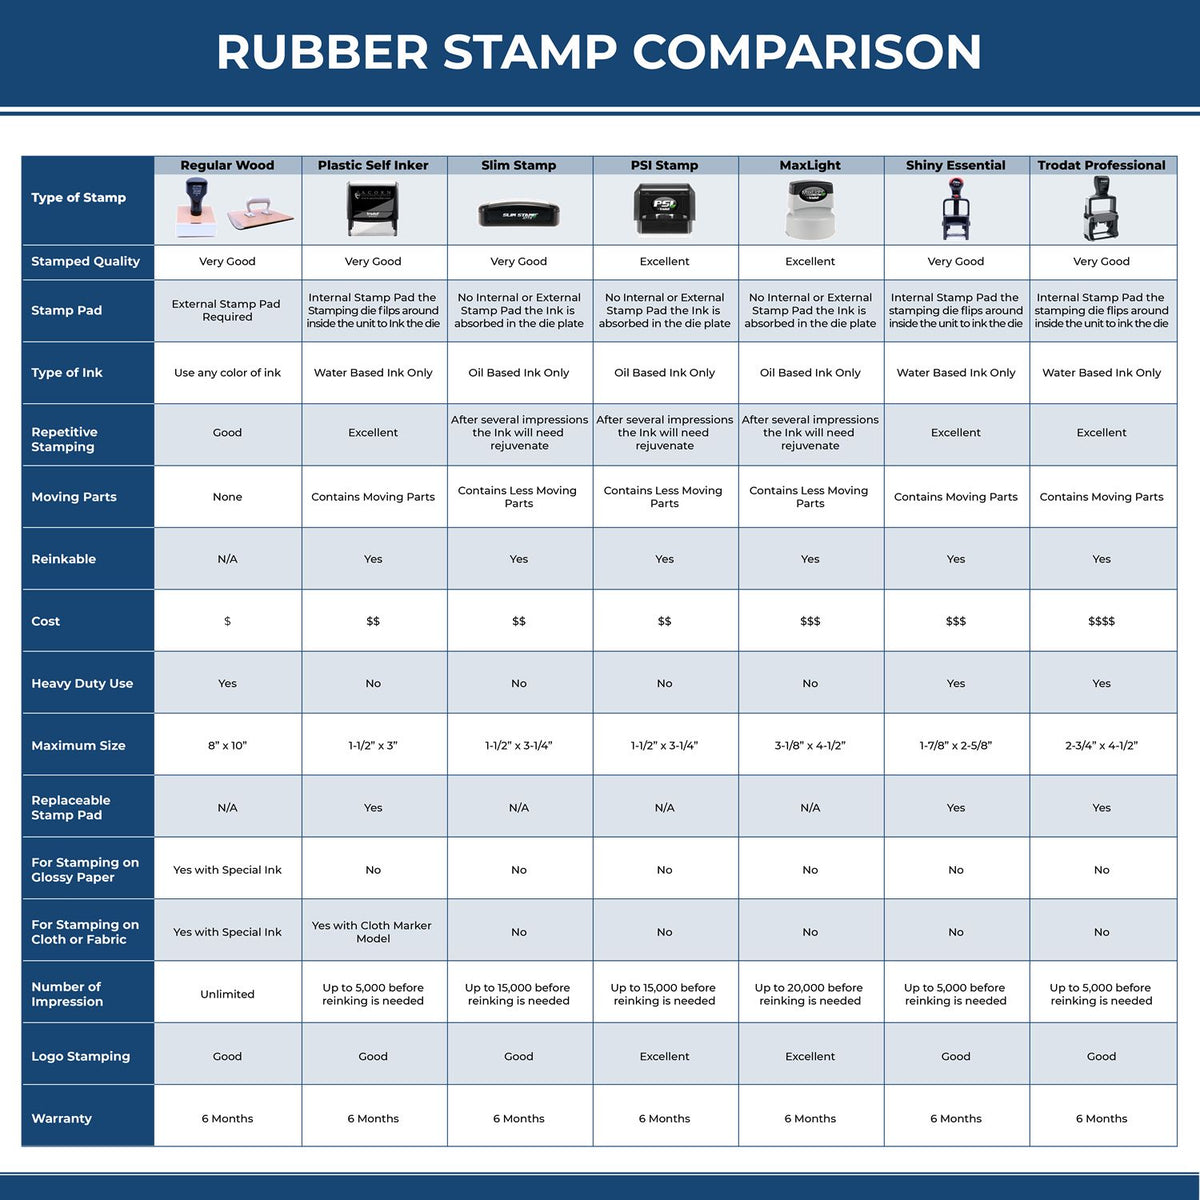 Large Petitioner Rubber Stamp 4628R Rubber Stamp Comparison